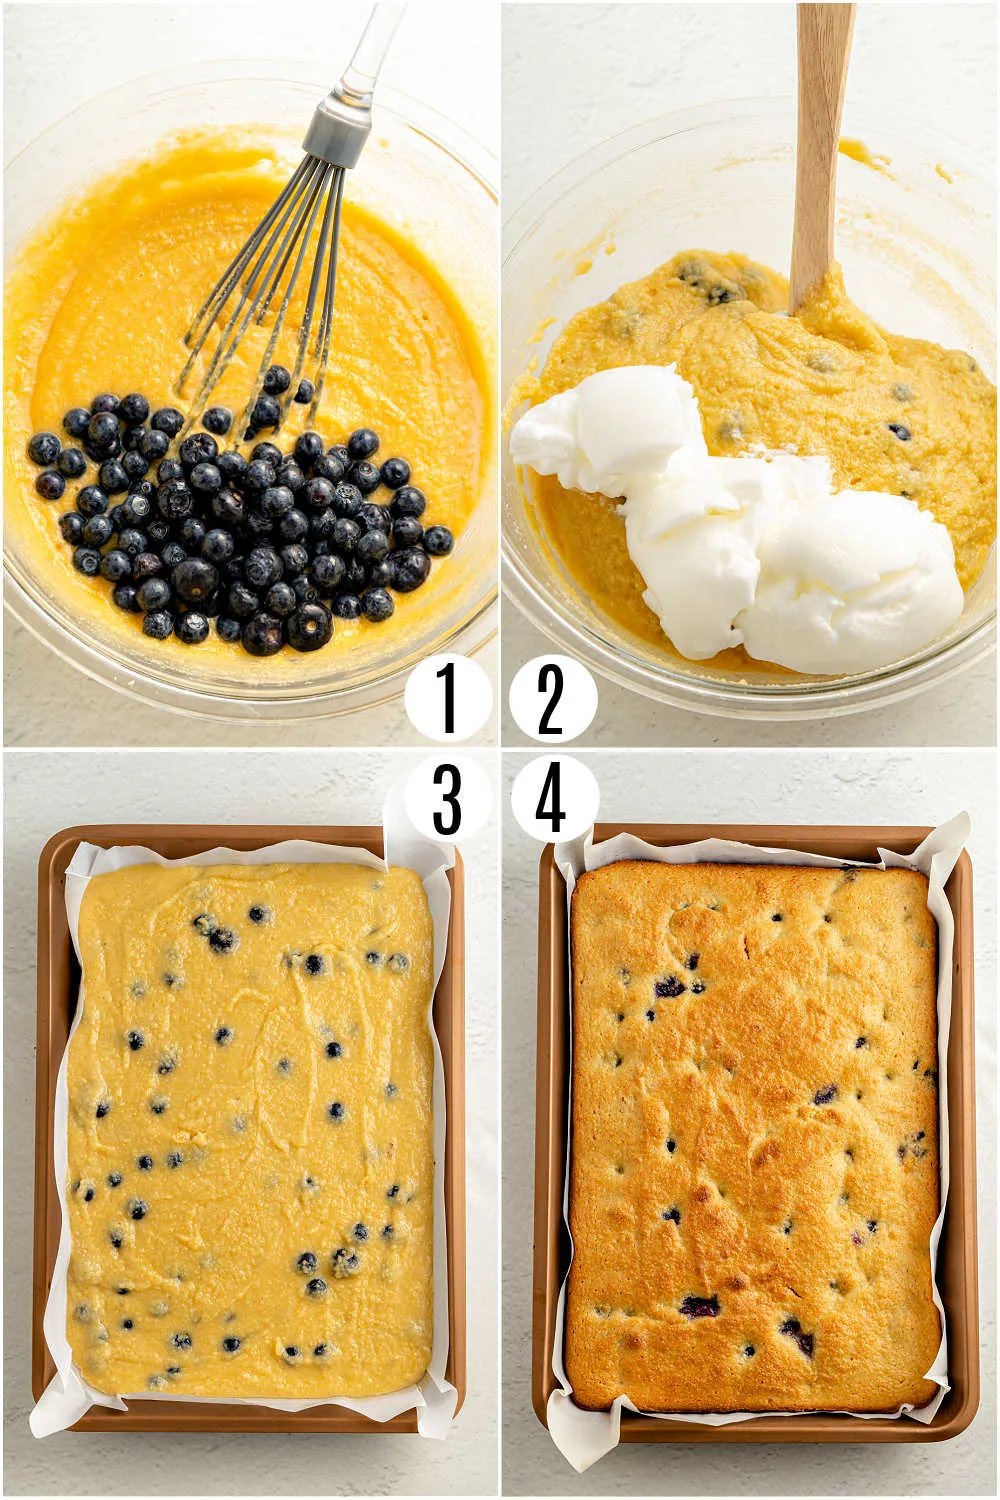 Step by step photos showing how to make lemon blueberry cake.